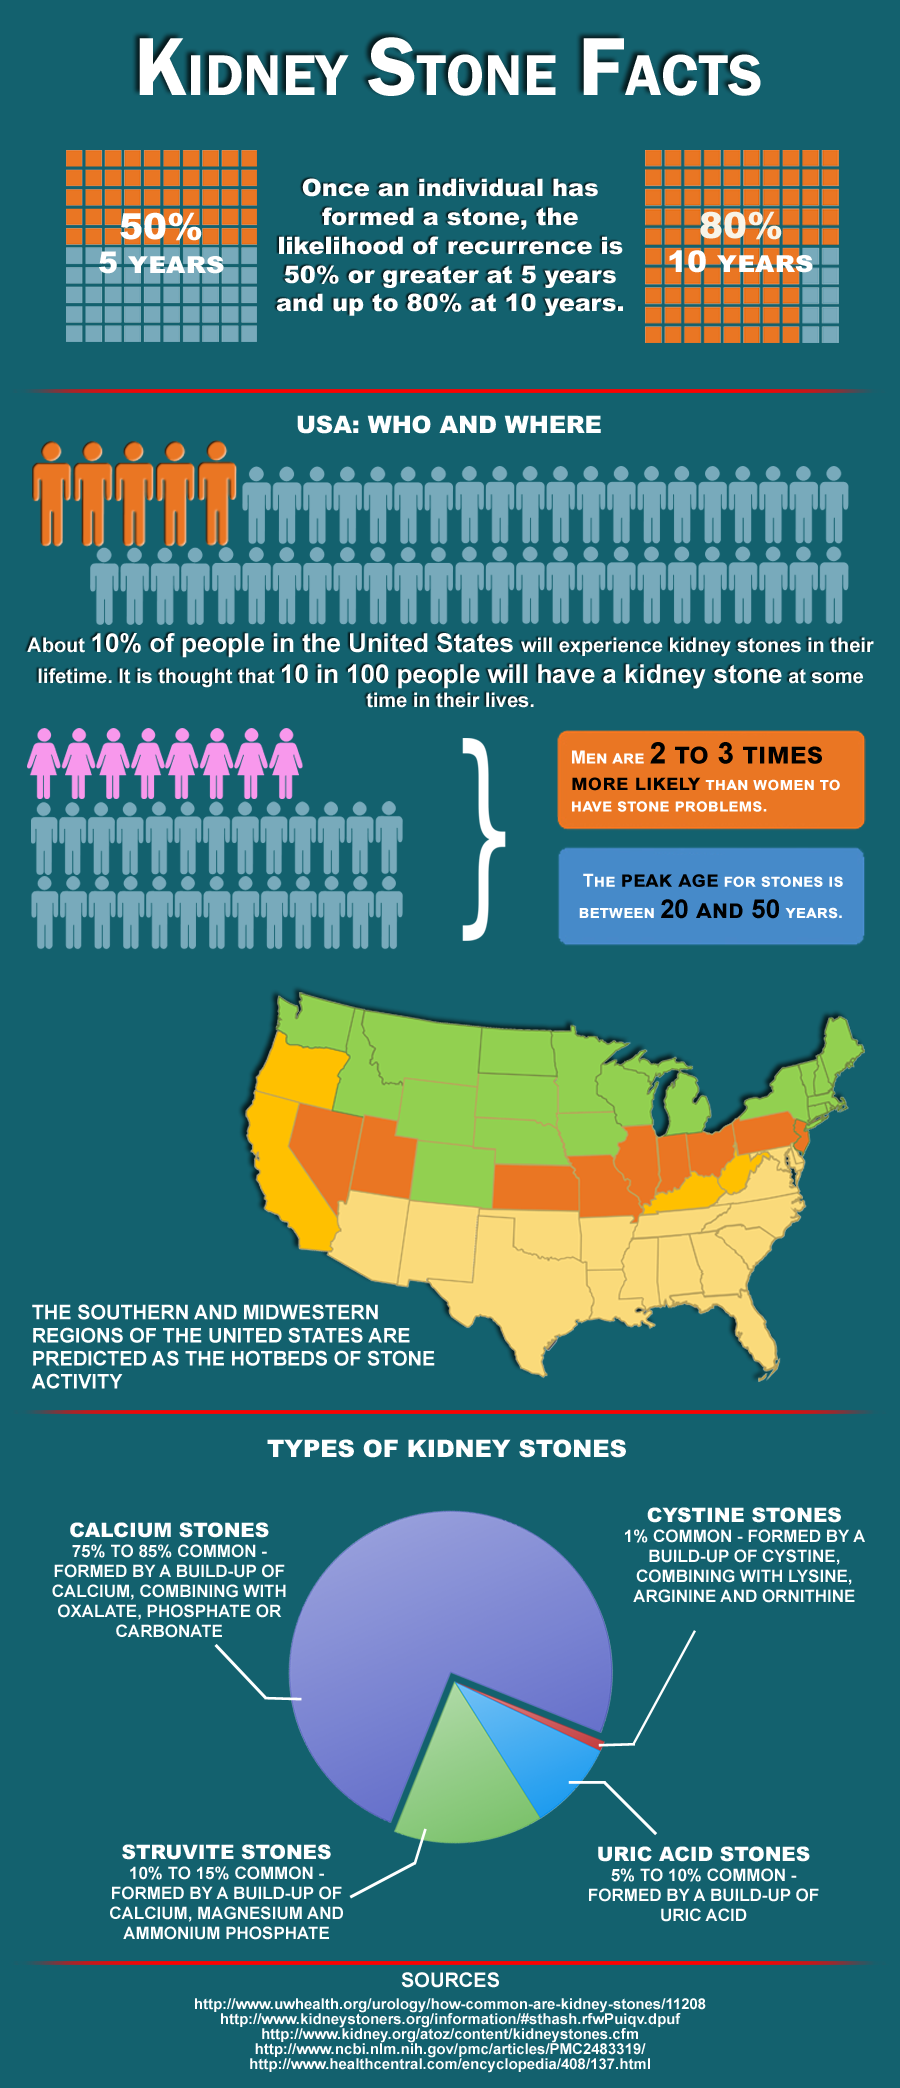 6 Infographics To Help You Avoid A Kidney Stone Attack Like The One